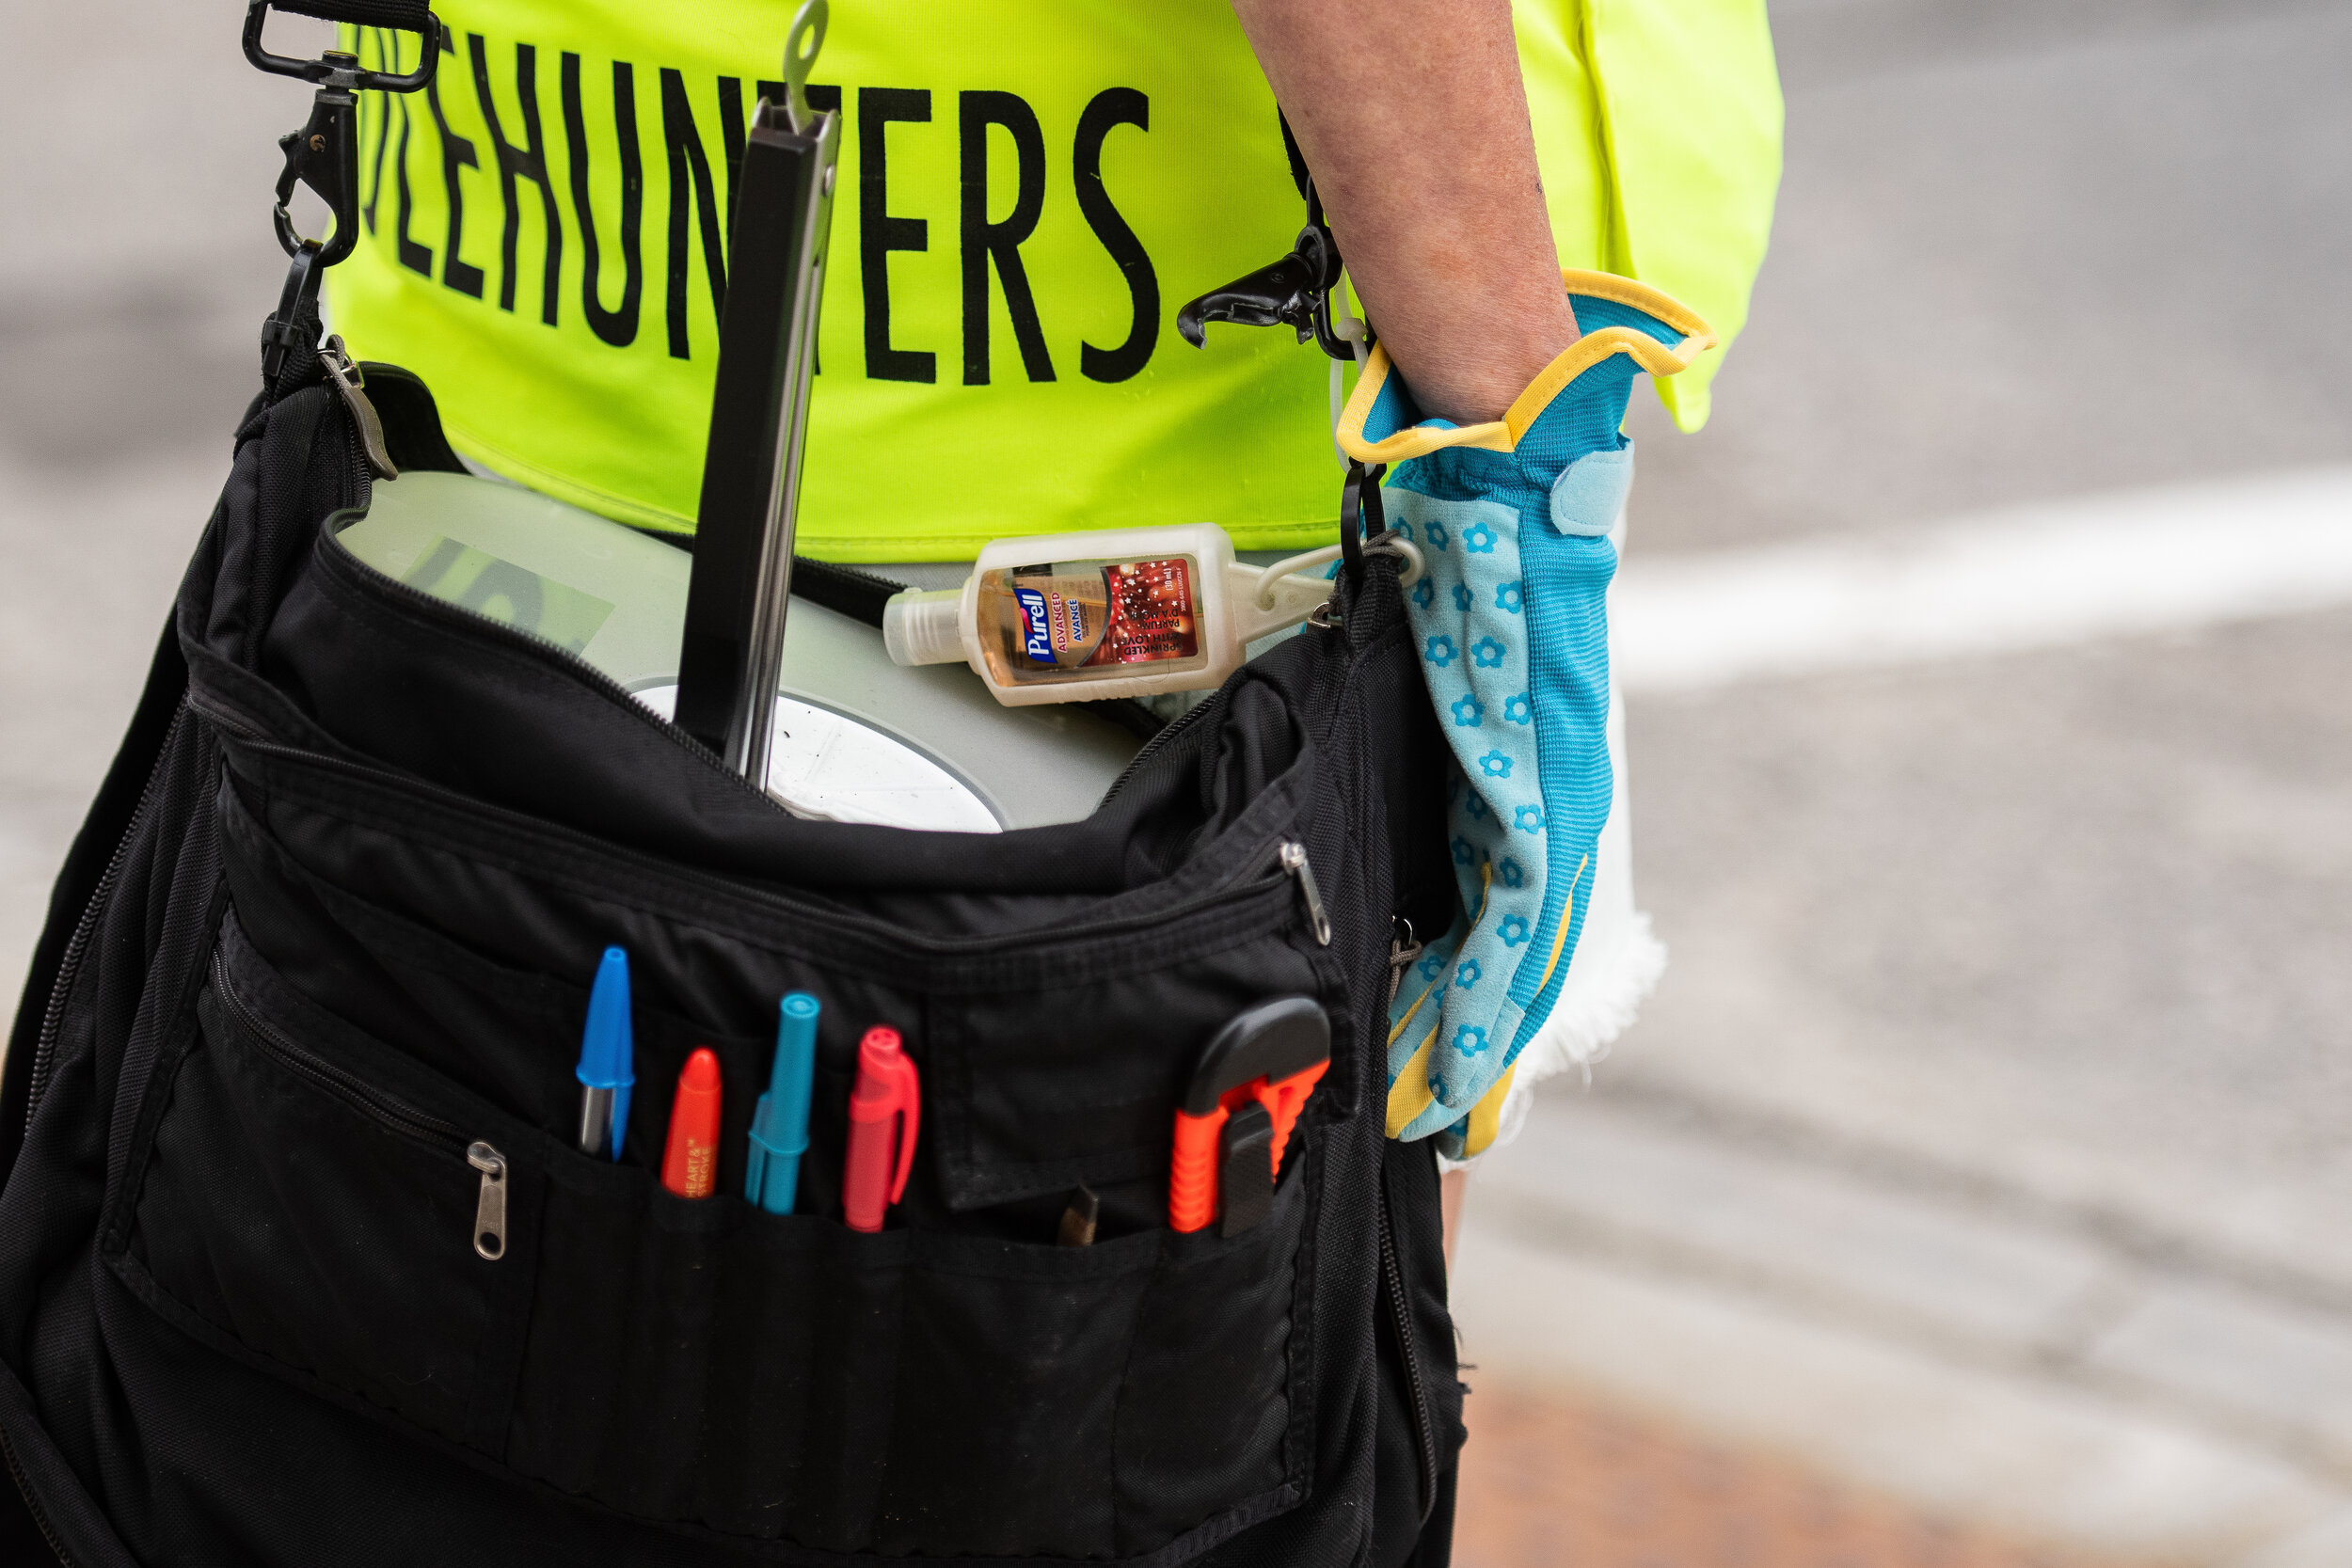  Needle hunters carry bags equipped with a sharp container and kitchen tongs to grab and store drug paraphernalia. Justin Byrne explains the yellow vests are important because they tell drug users hunters are non-threatening and only there to clean. 